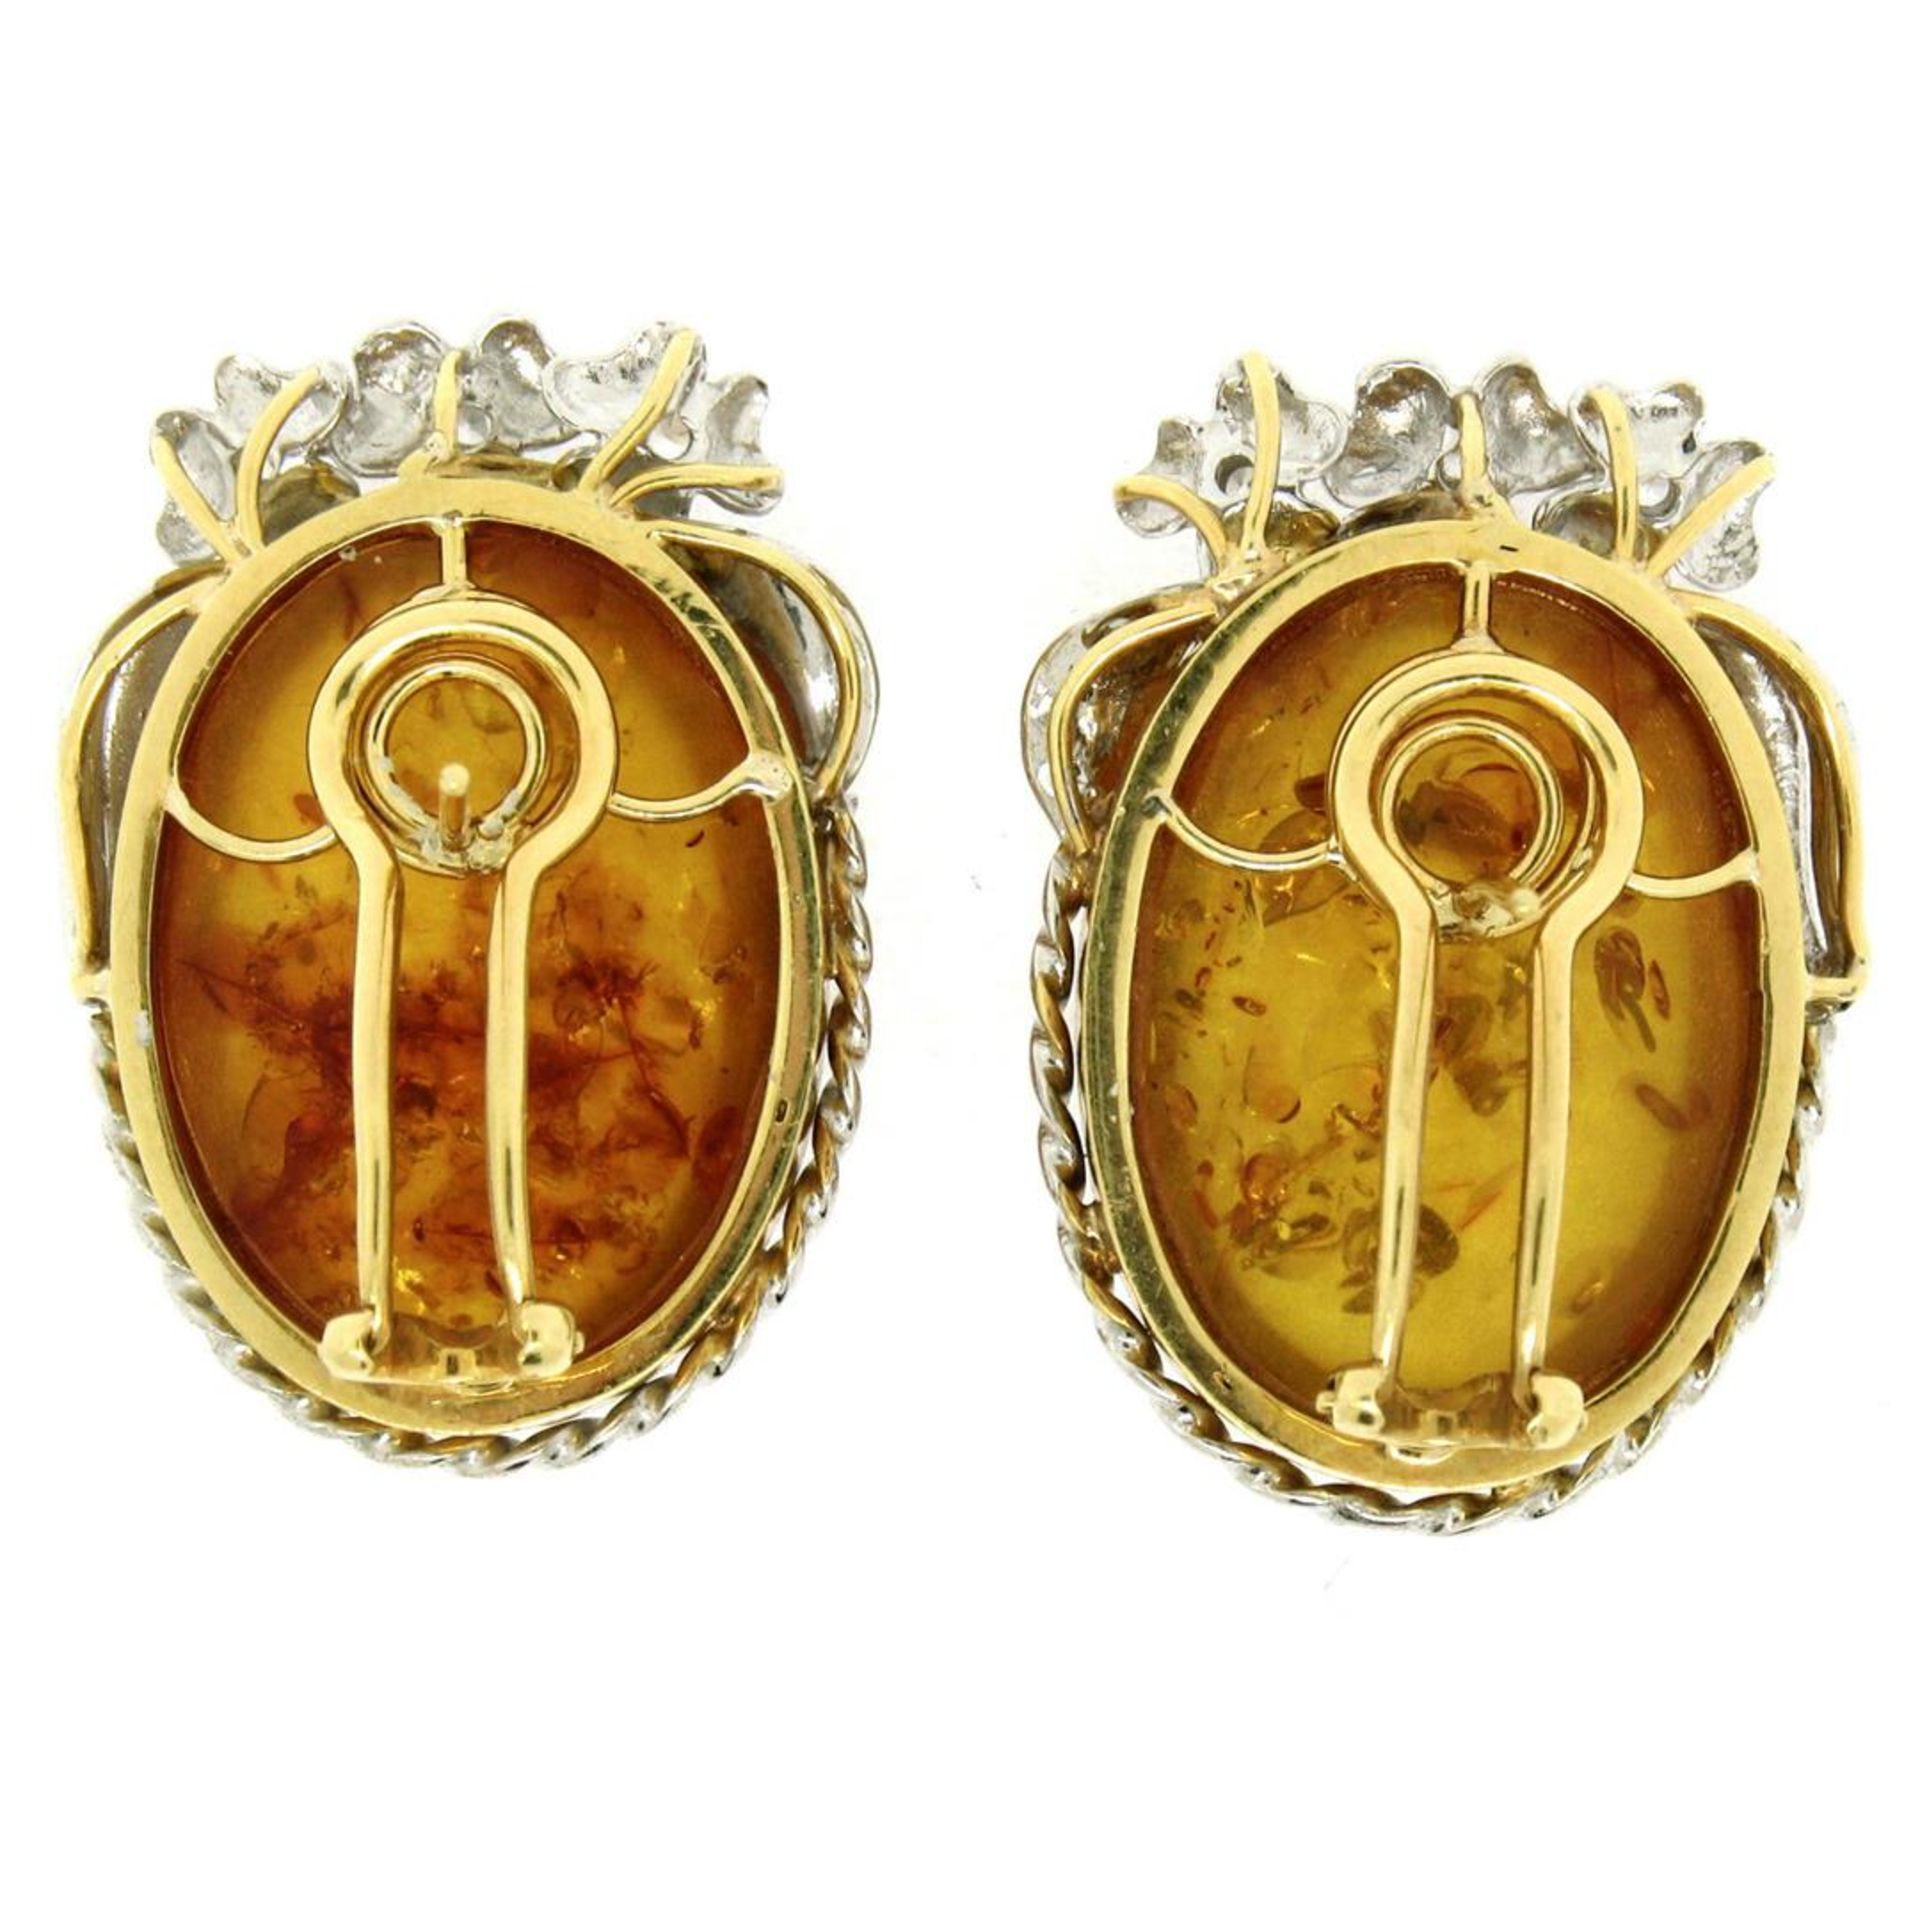 Vintage 18k White Gold Large Oval Amber Diamond Omega Earrings w/ Flower Etching - Image 5 of 6